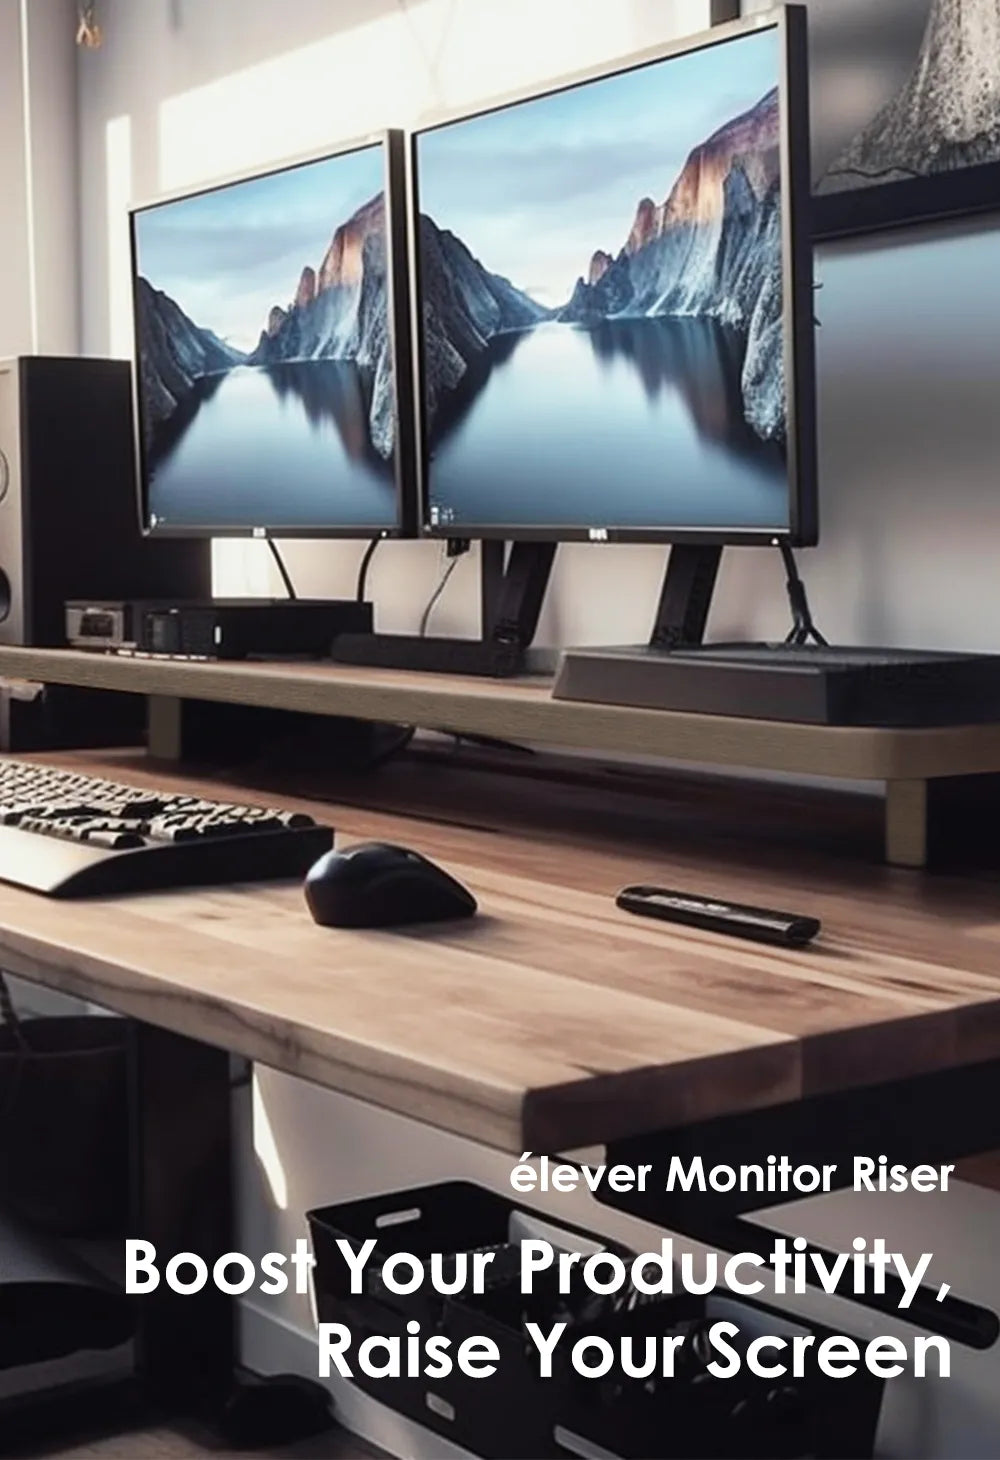 Boost Your Productivity, Raise Your Screen": "An ergonomic workspace featuring the éléver Monitor Riser with two monitors, a keyboard, and a speaker, emphasizing increased productivity.